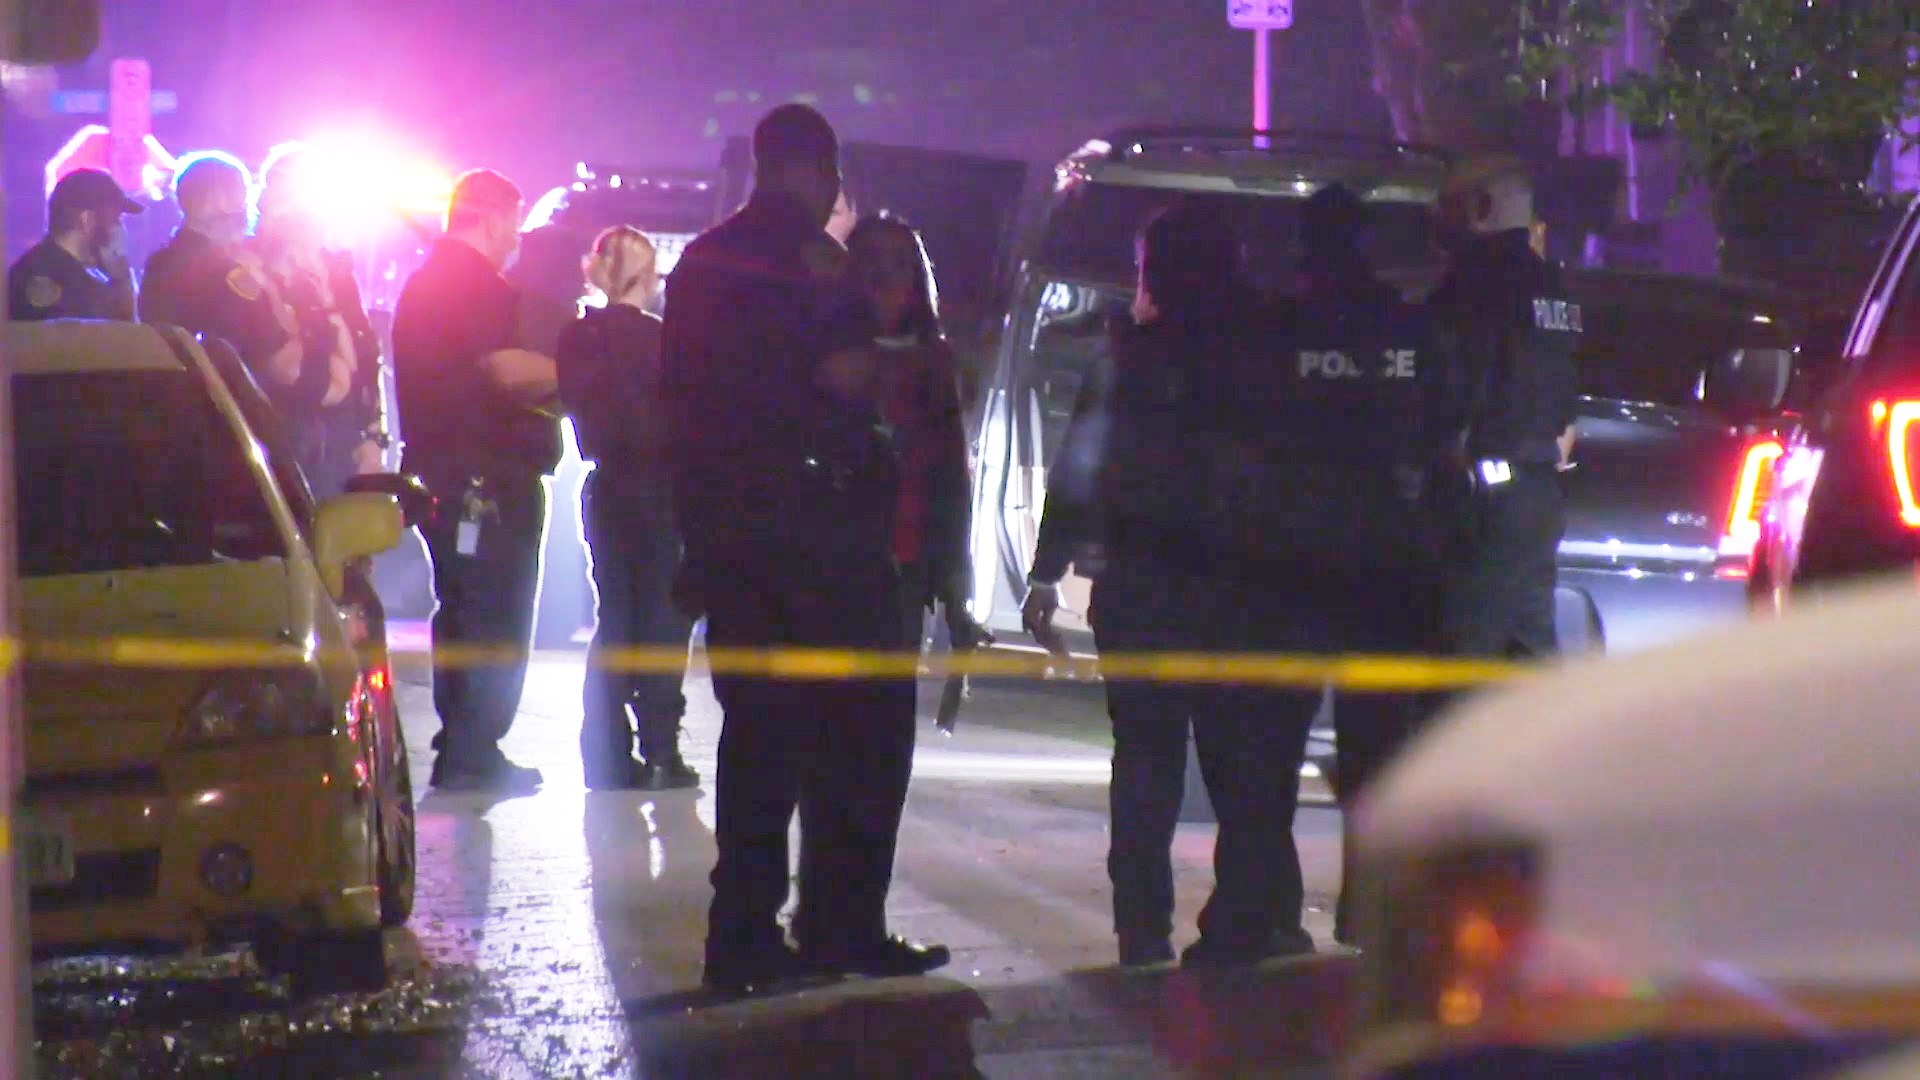 Police are looking for the person who fatally shot a man in Houston’s Third Ward early Monday morning.